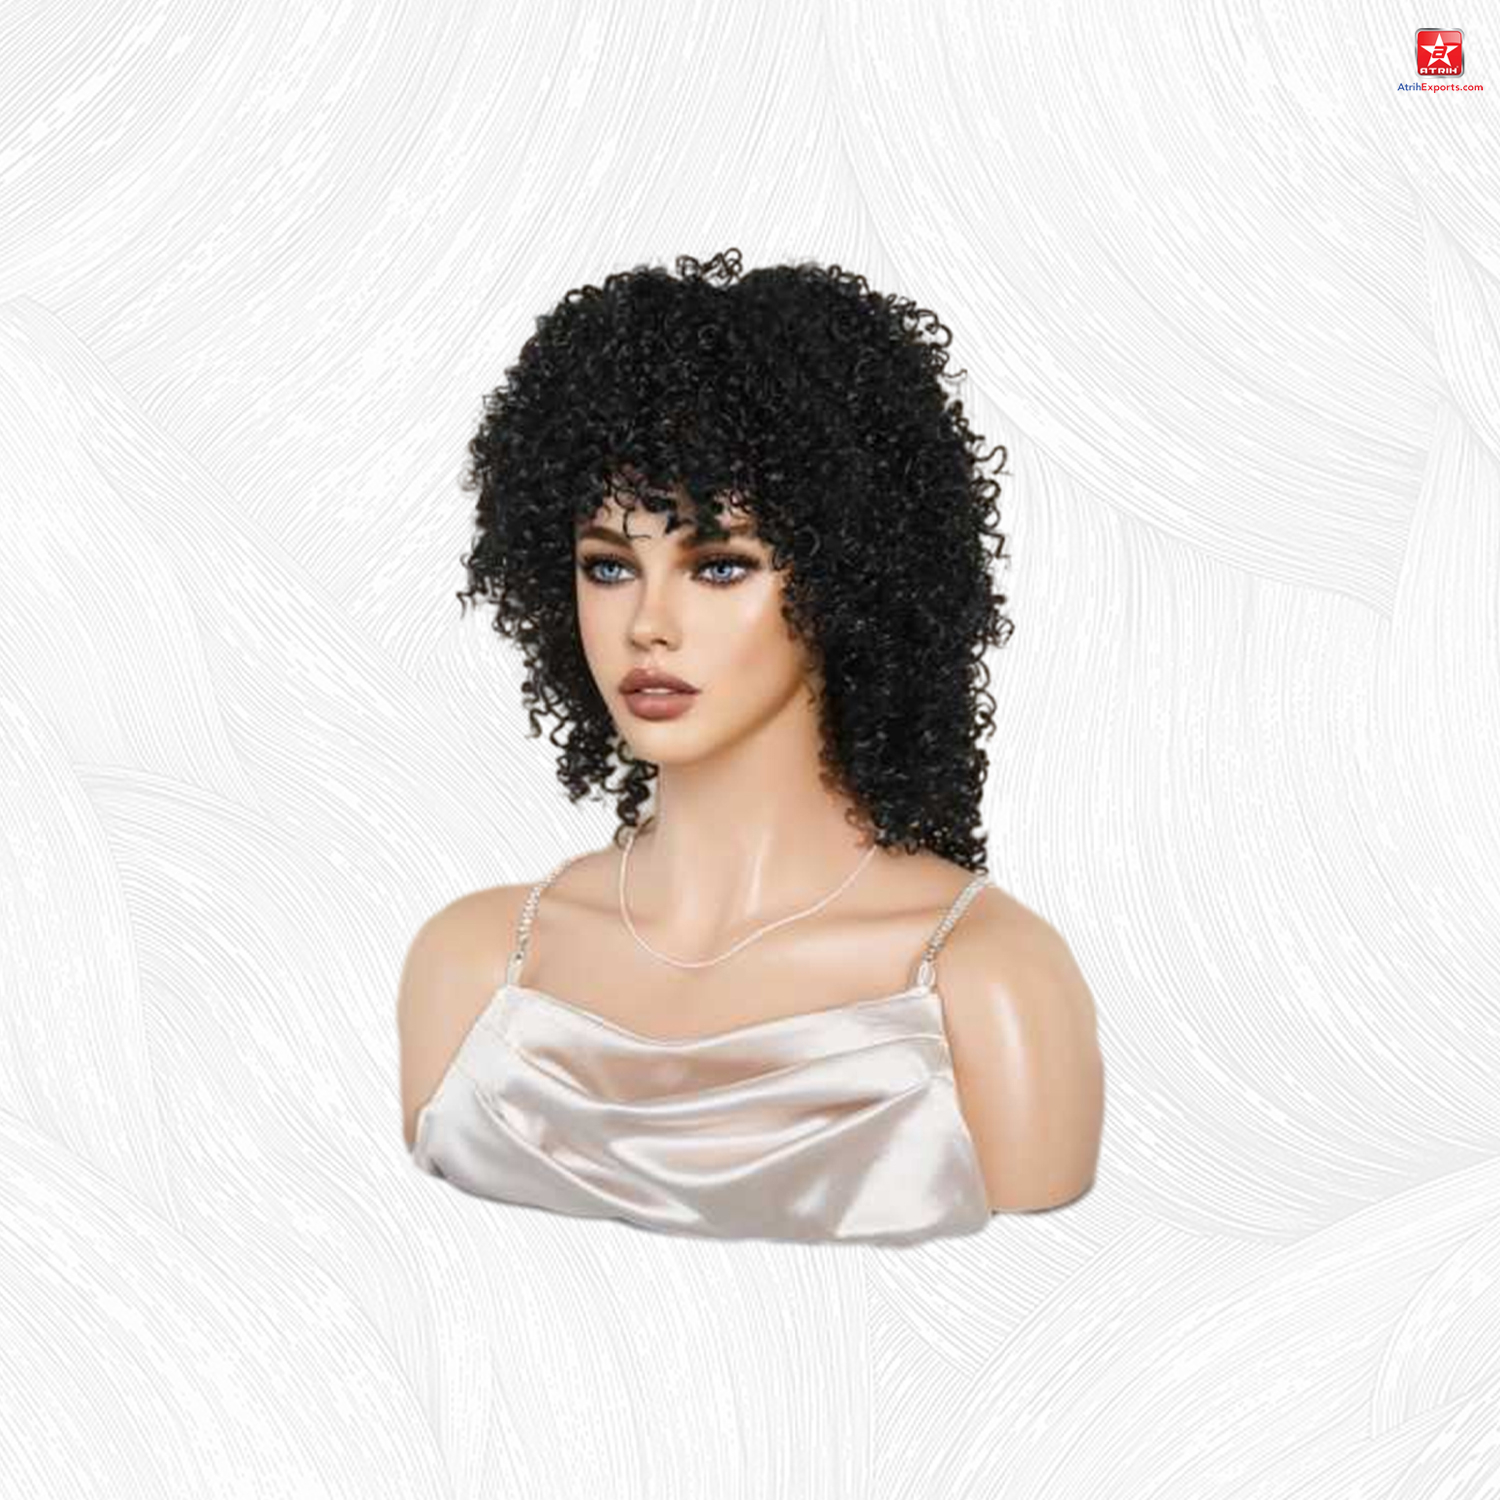 Brazilian Curly Lace Front Wig Curly Human Hair Women's Black Afro Curl Wig